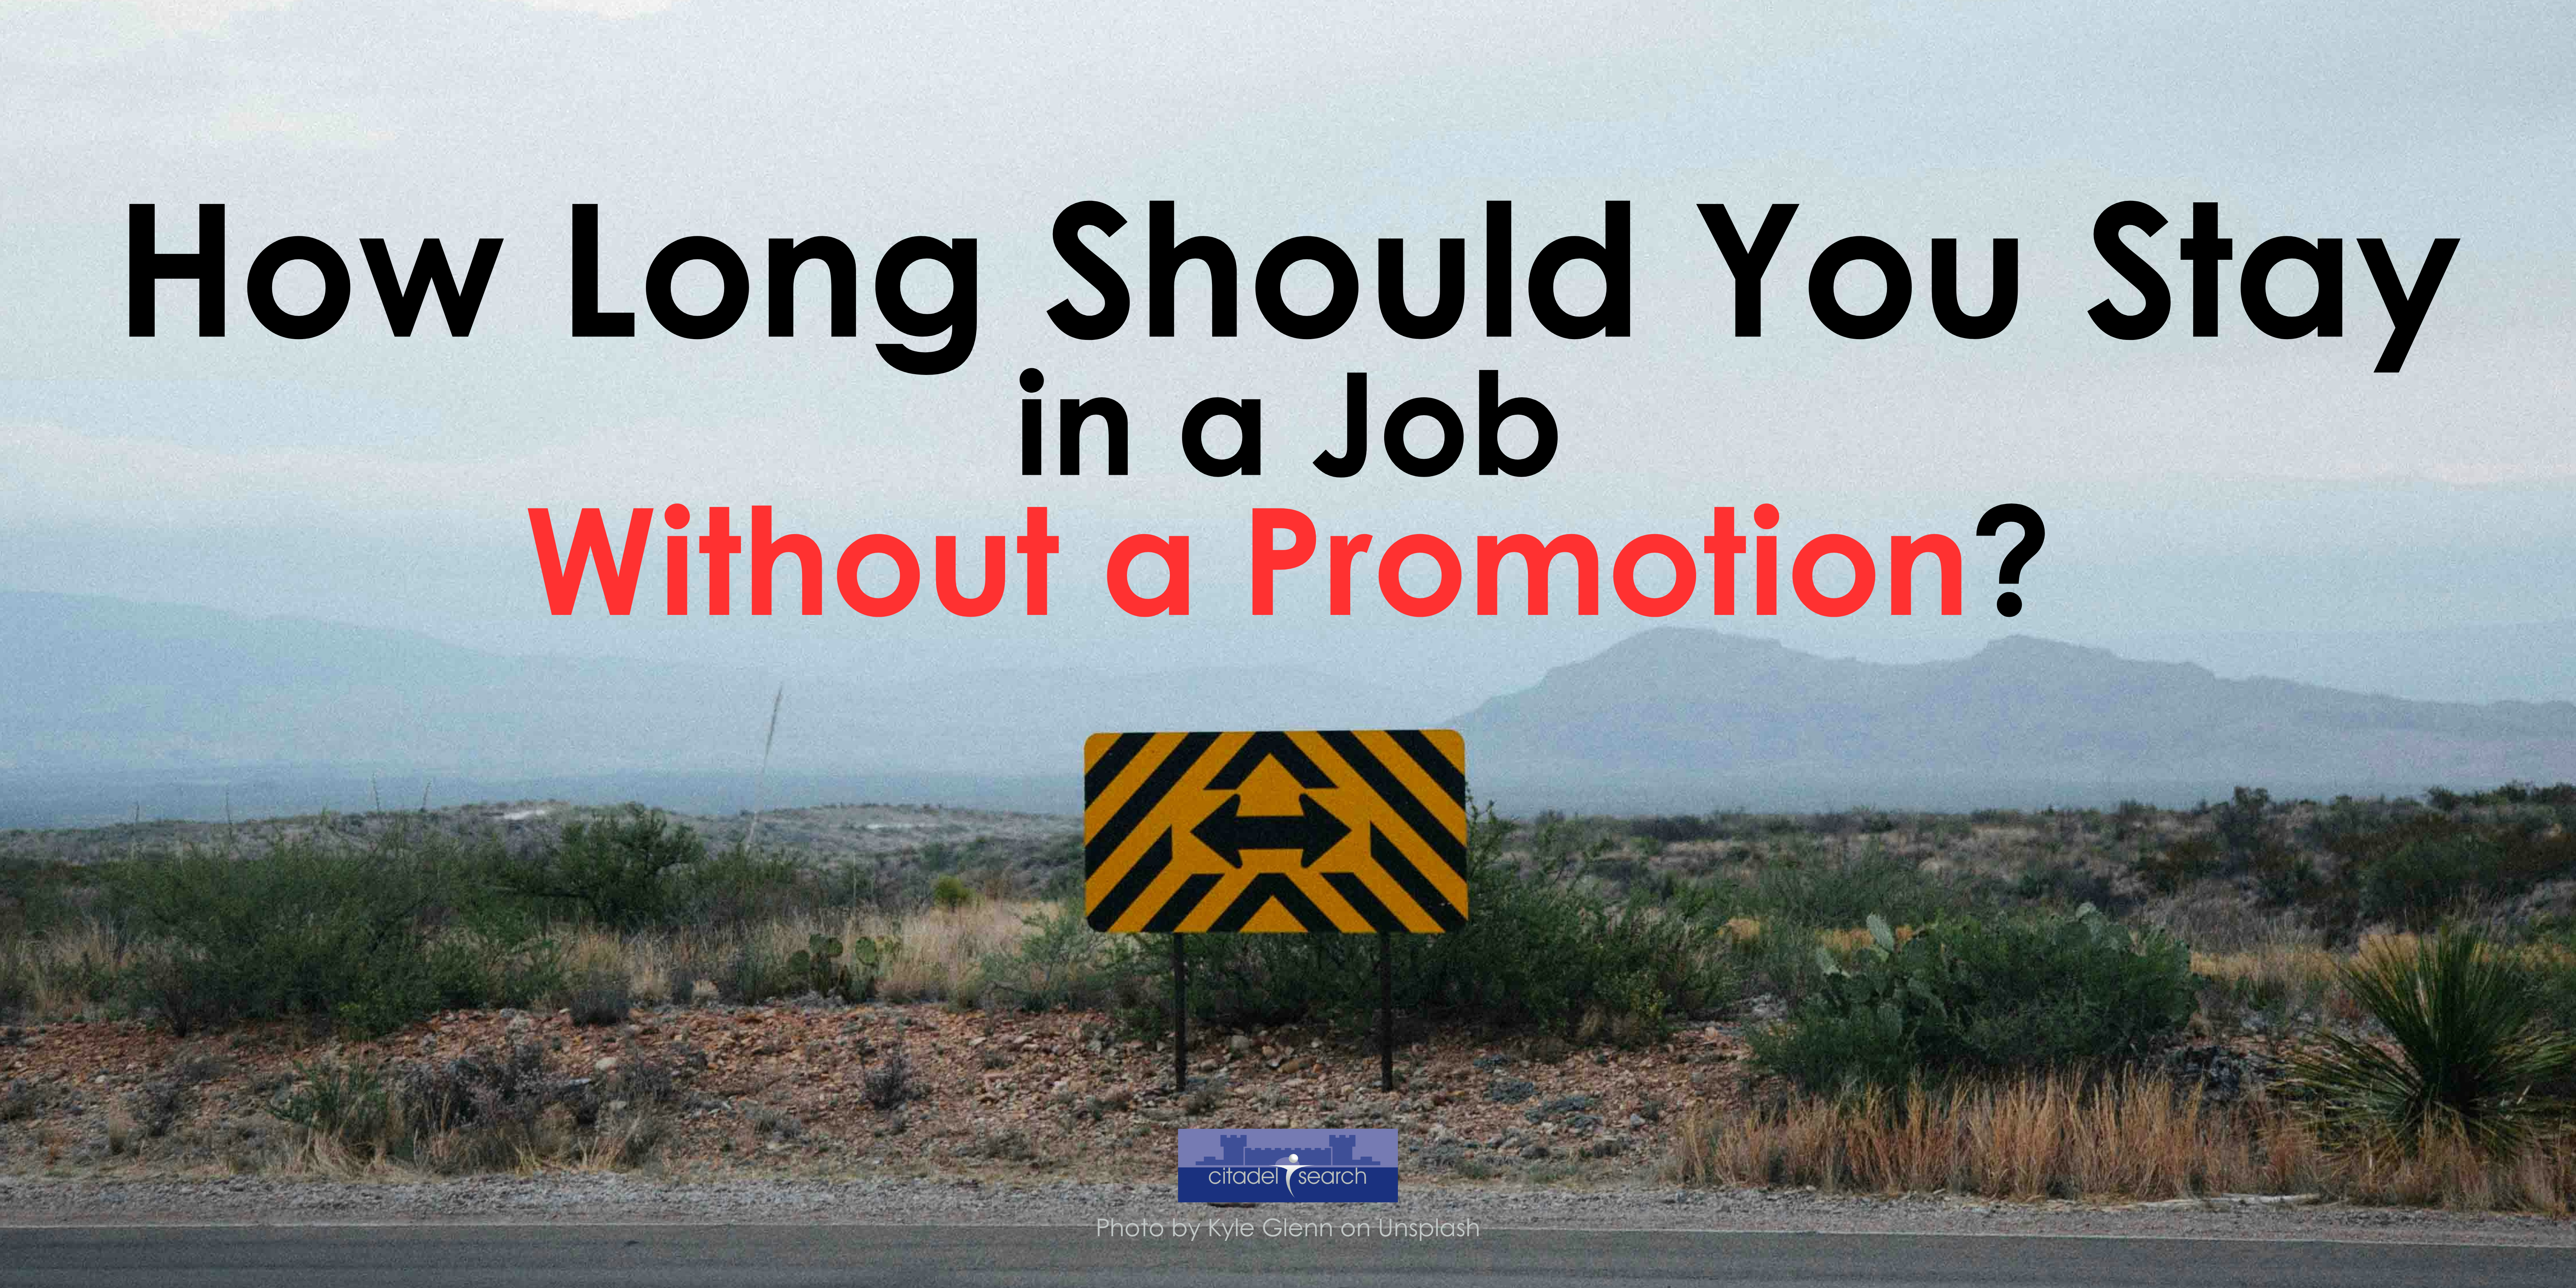 How Long Should You Stay in a Job Without a Promotion?